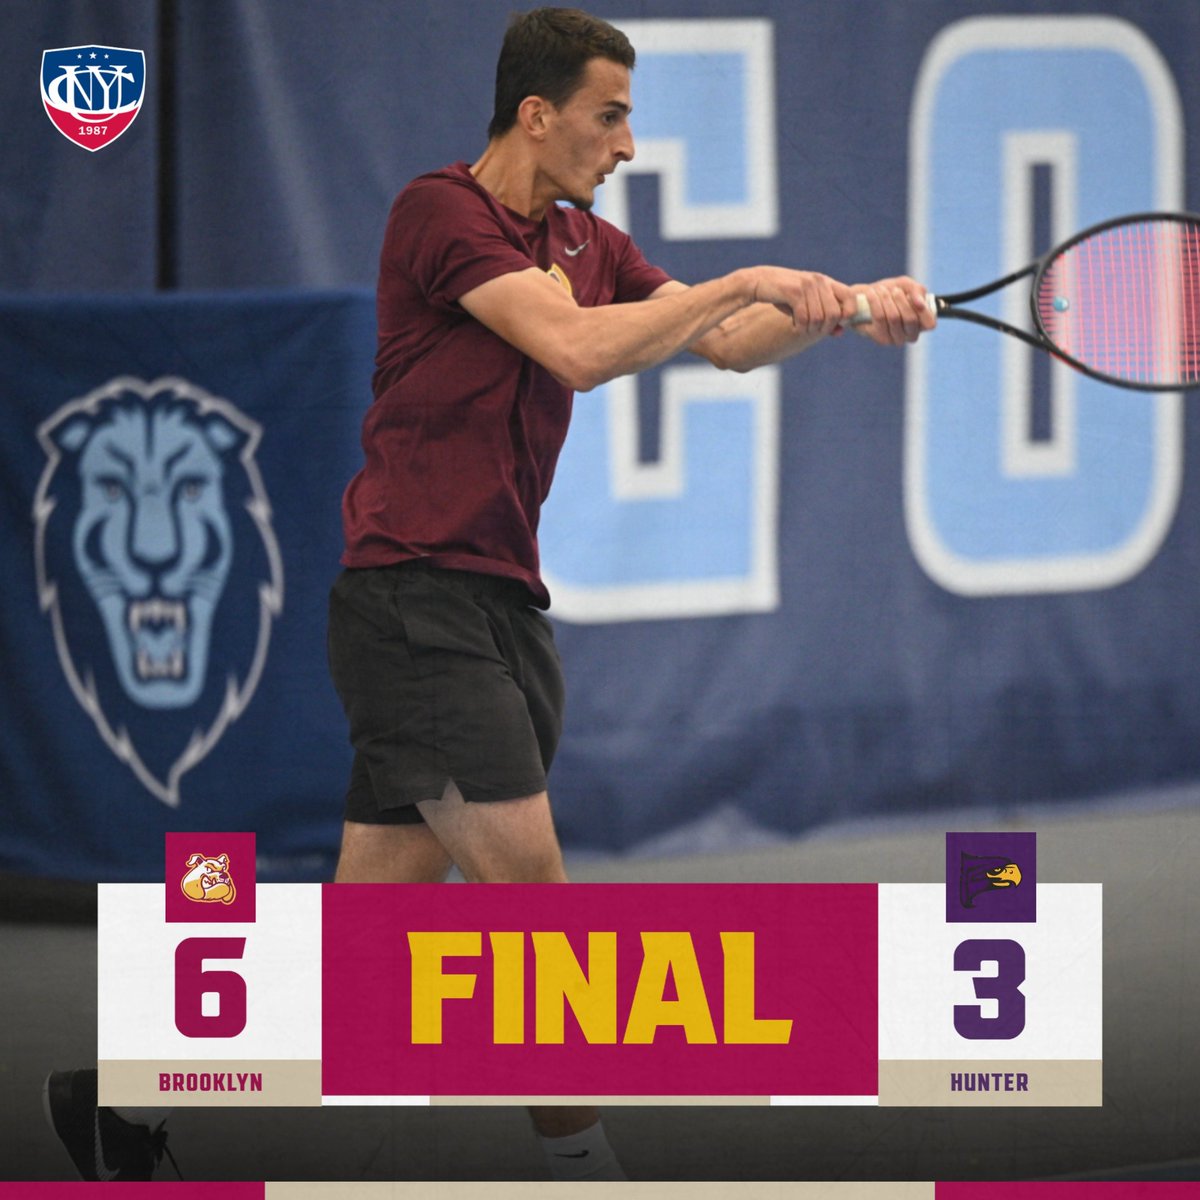 Bulldogs WIN!!! #BCmt picks up 🔑 @cunyac win over #Huntermt this afternoon! 🐶🎾 #PlayLikeaBulldog #cunytennis #d3tennis #ita